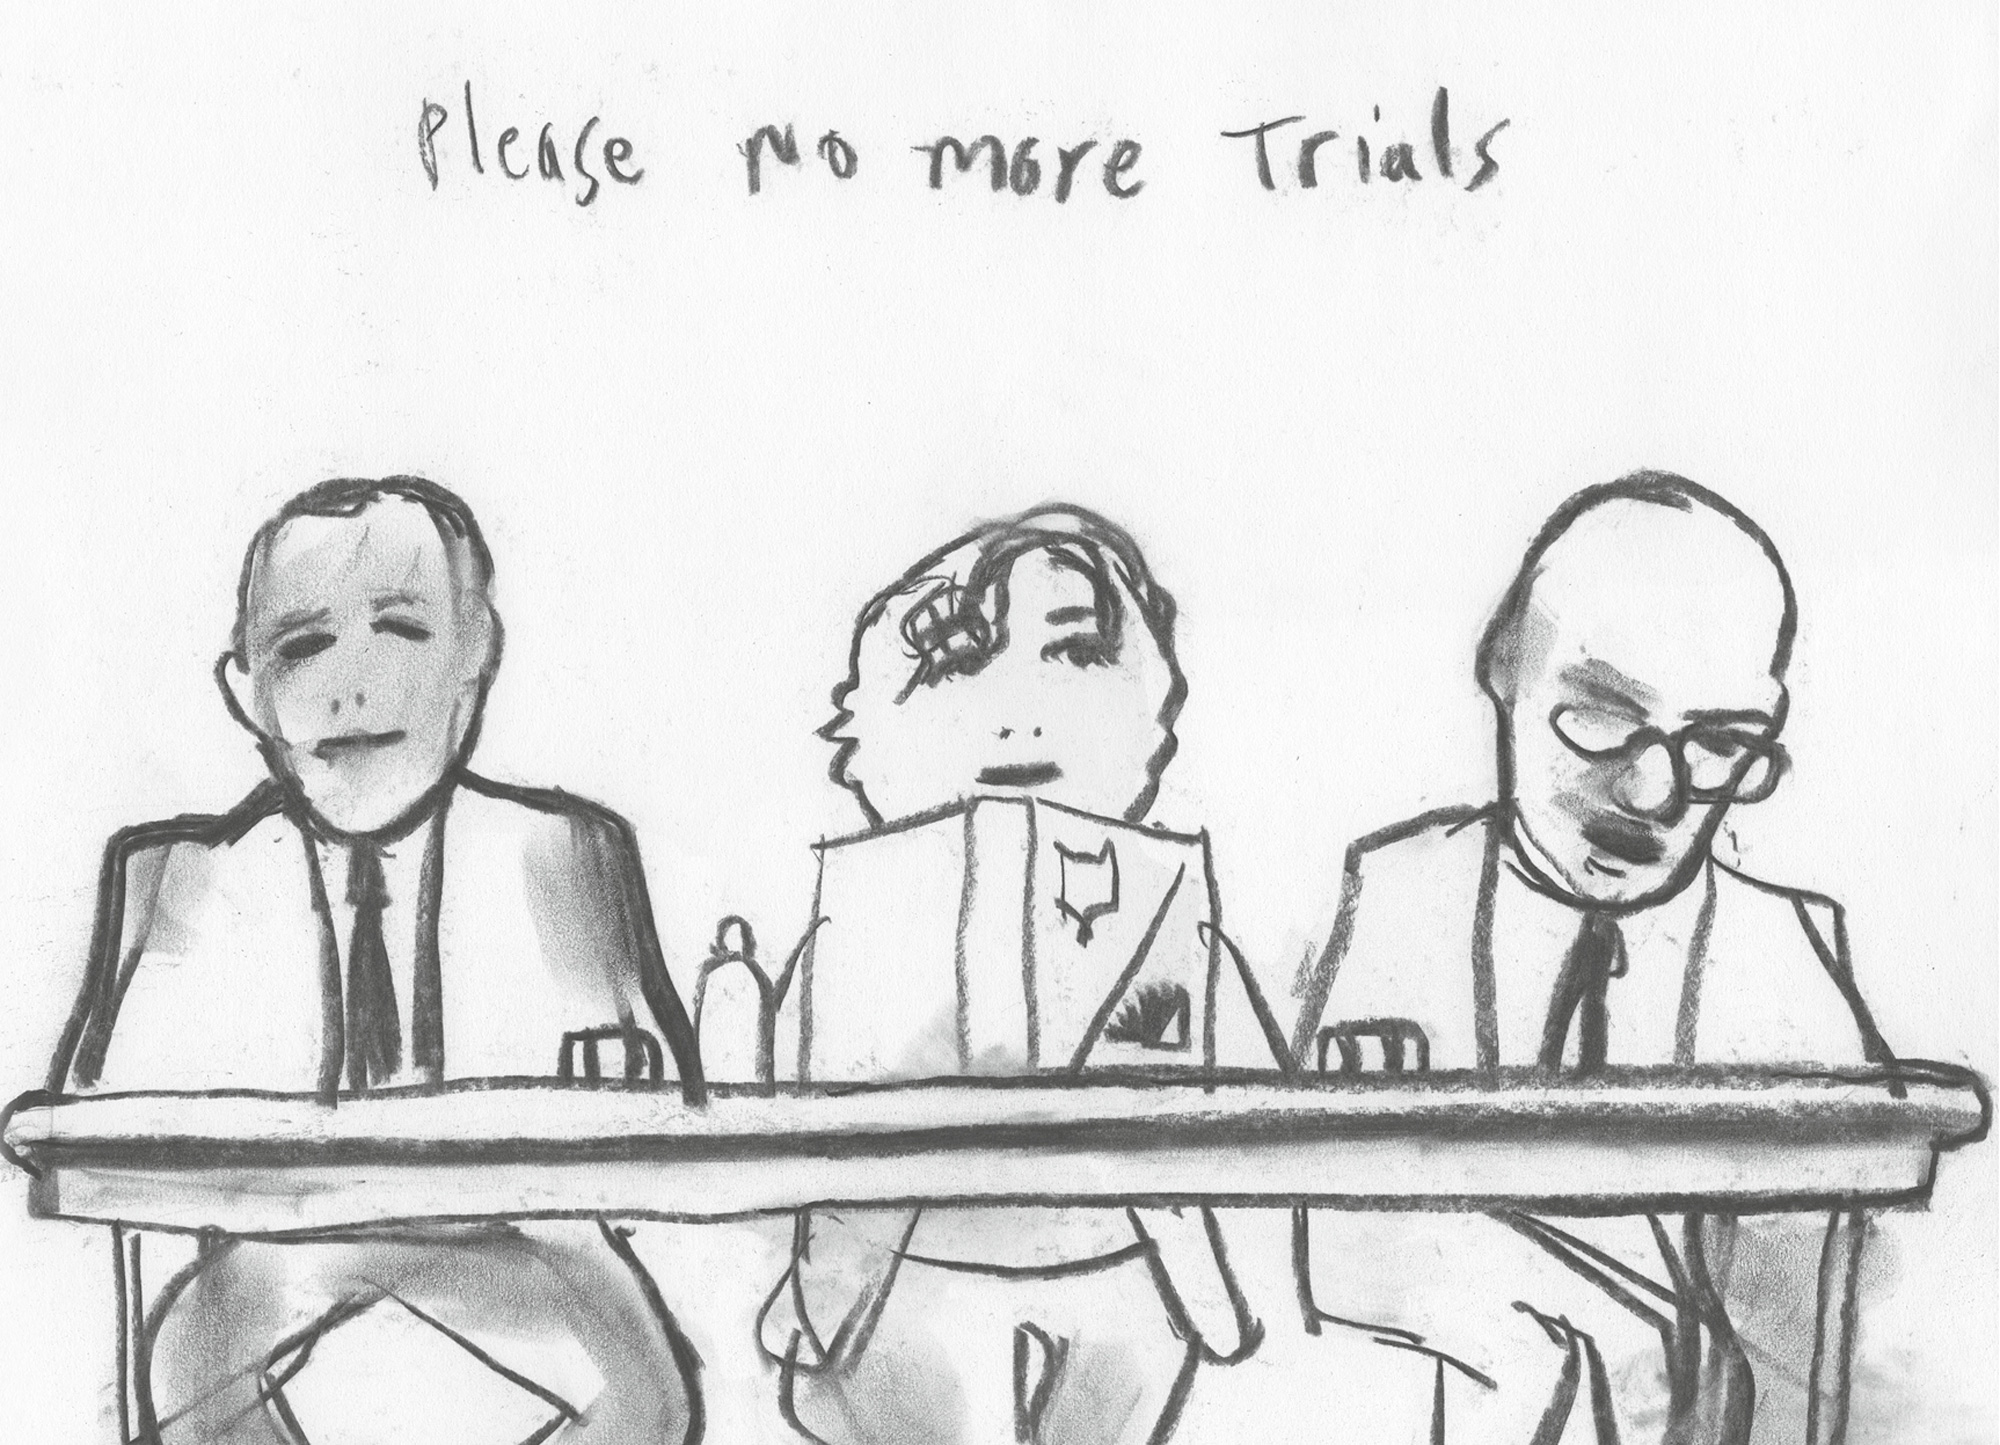 A courtroom sketch by Alexi Worth of the three justices below the words “please no more trials.”